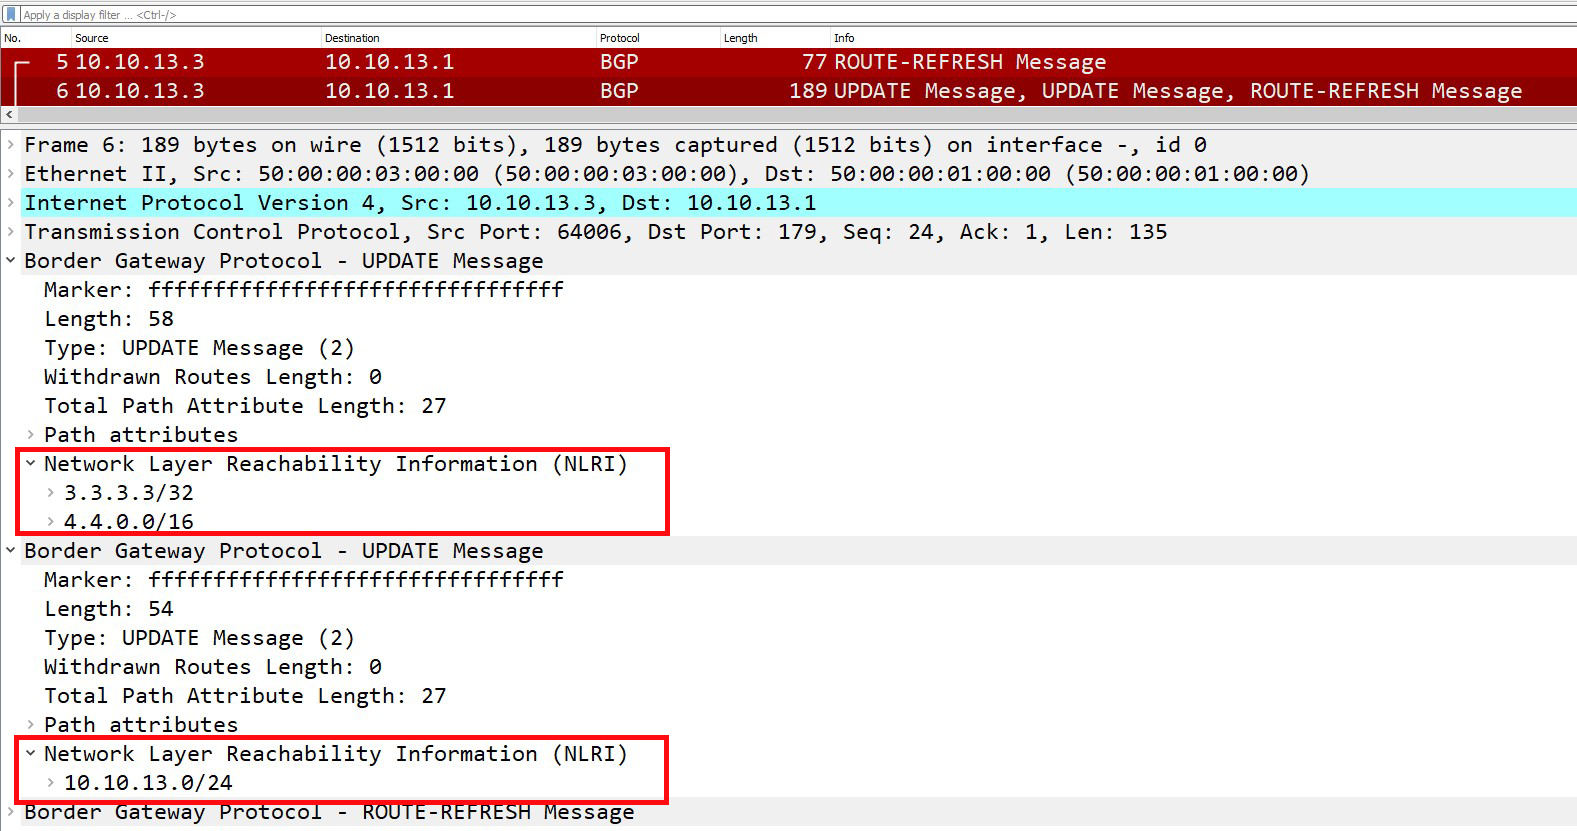 Wireshark capture displaying a BGP update message with three networks advertised.